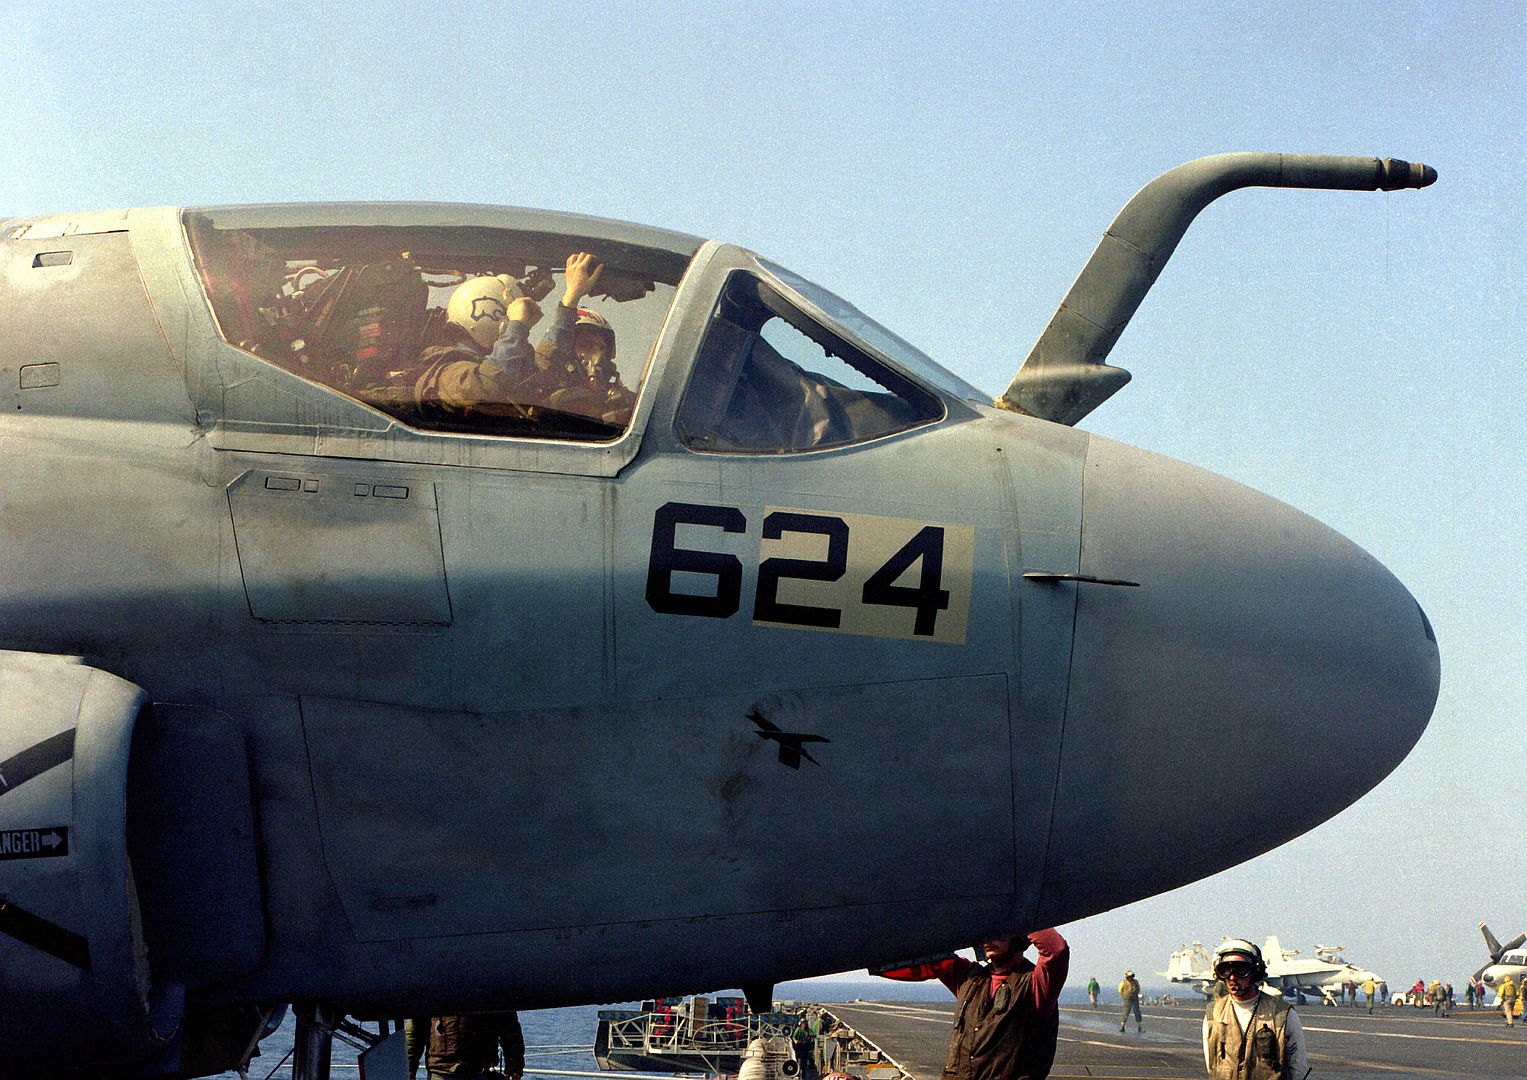 6B Prowler Flight Crew Wait For Flight Deck Crewmen To Complete A Preflight Check Aboard The USS CORAL SEA During Operations Near Libya